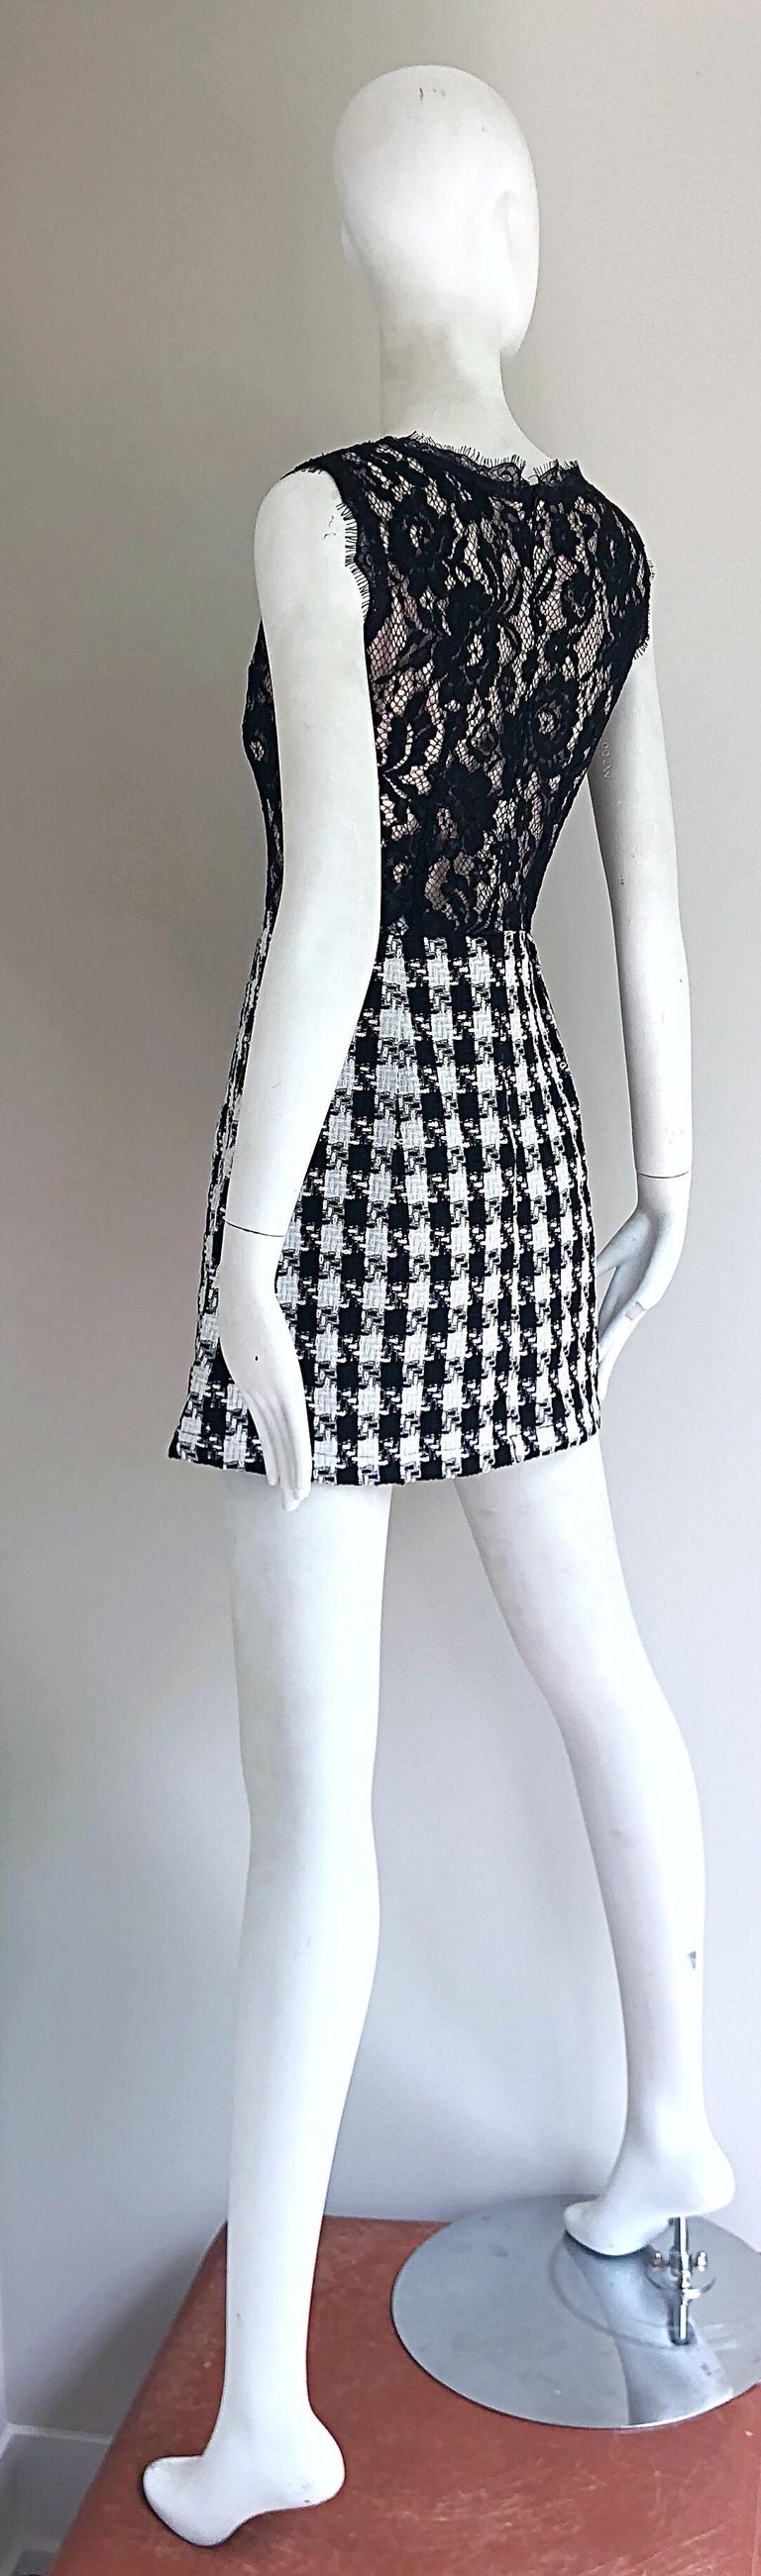 Marc Jacobs Early 2000s Black and White Lace Houndstooth Checkered Mini Dress For Sale 10